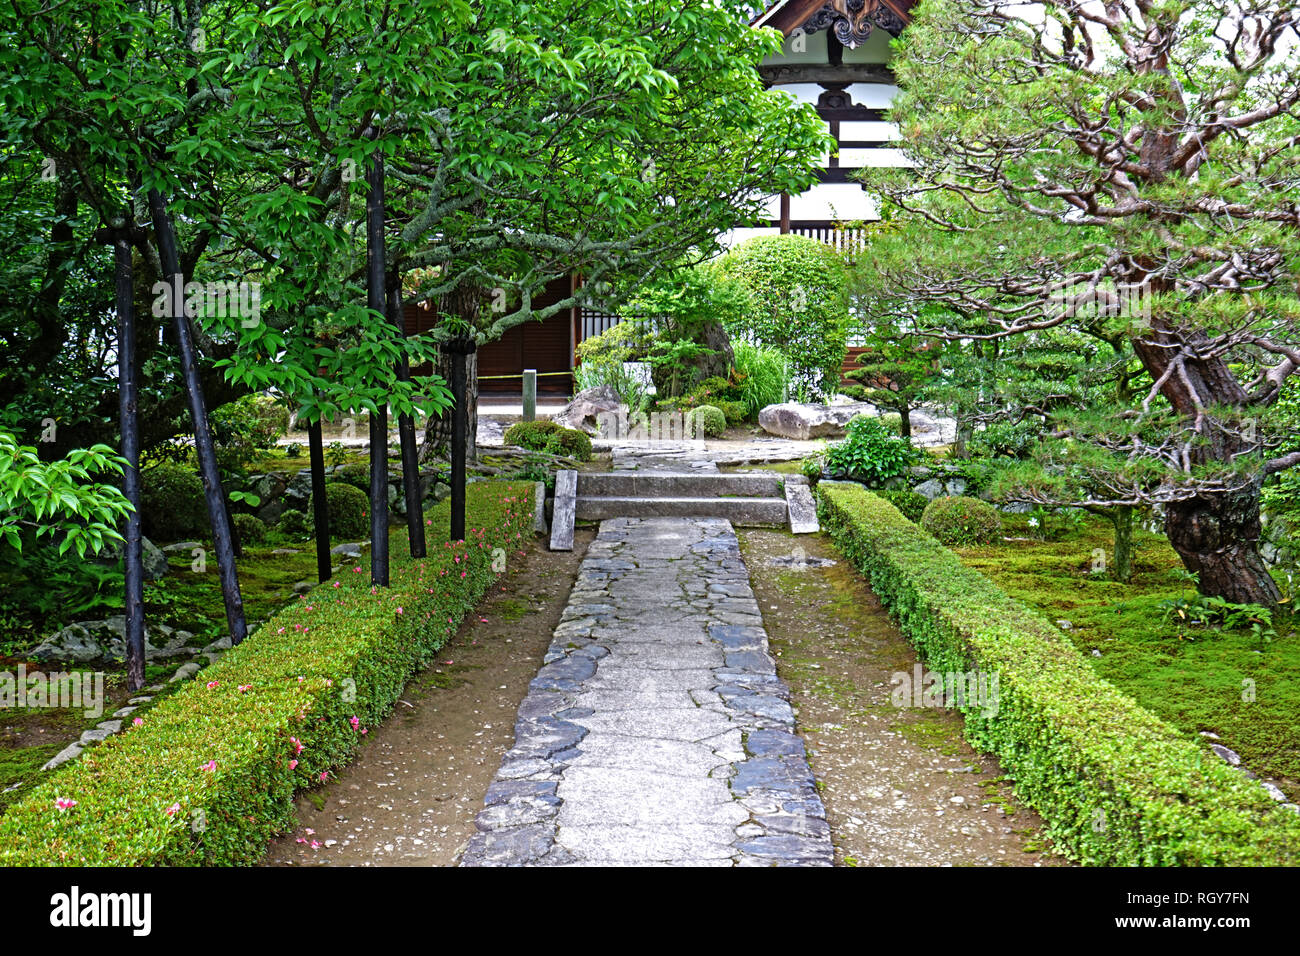 The Japan traditional zen garden, gray stone road, green plants and trees Stock Photo